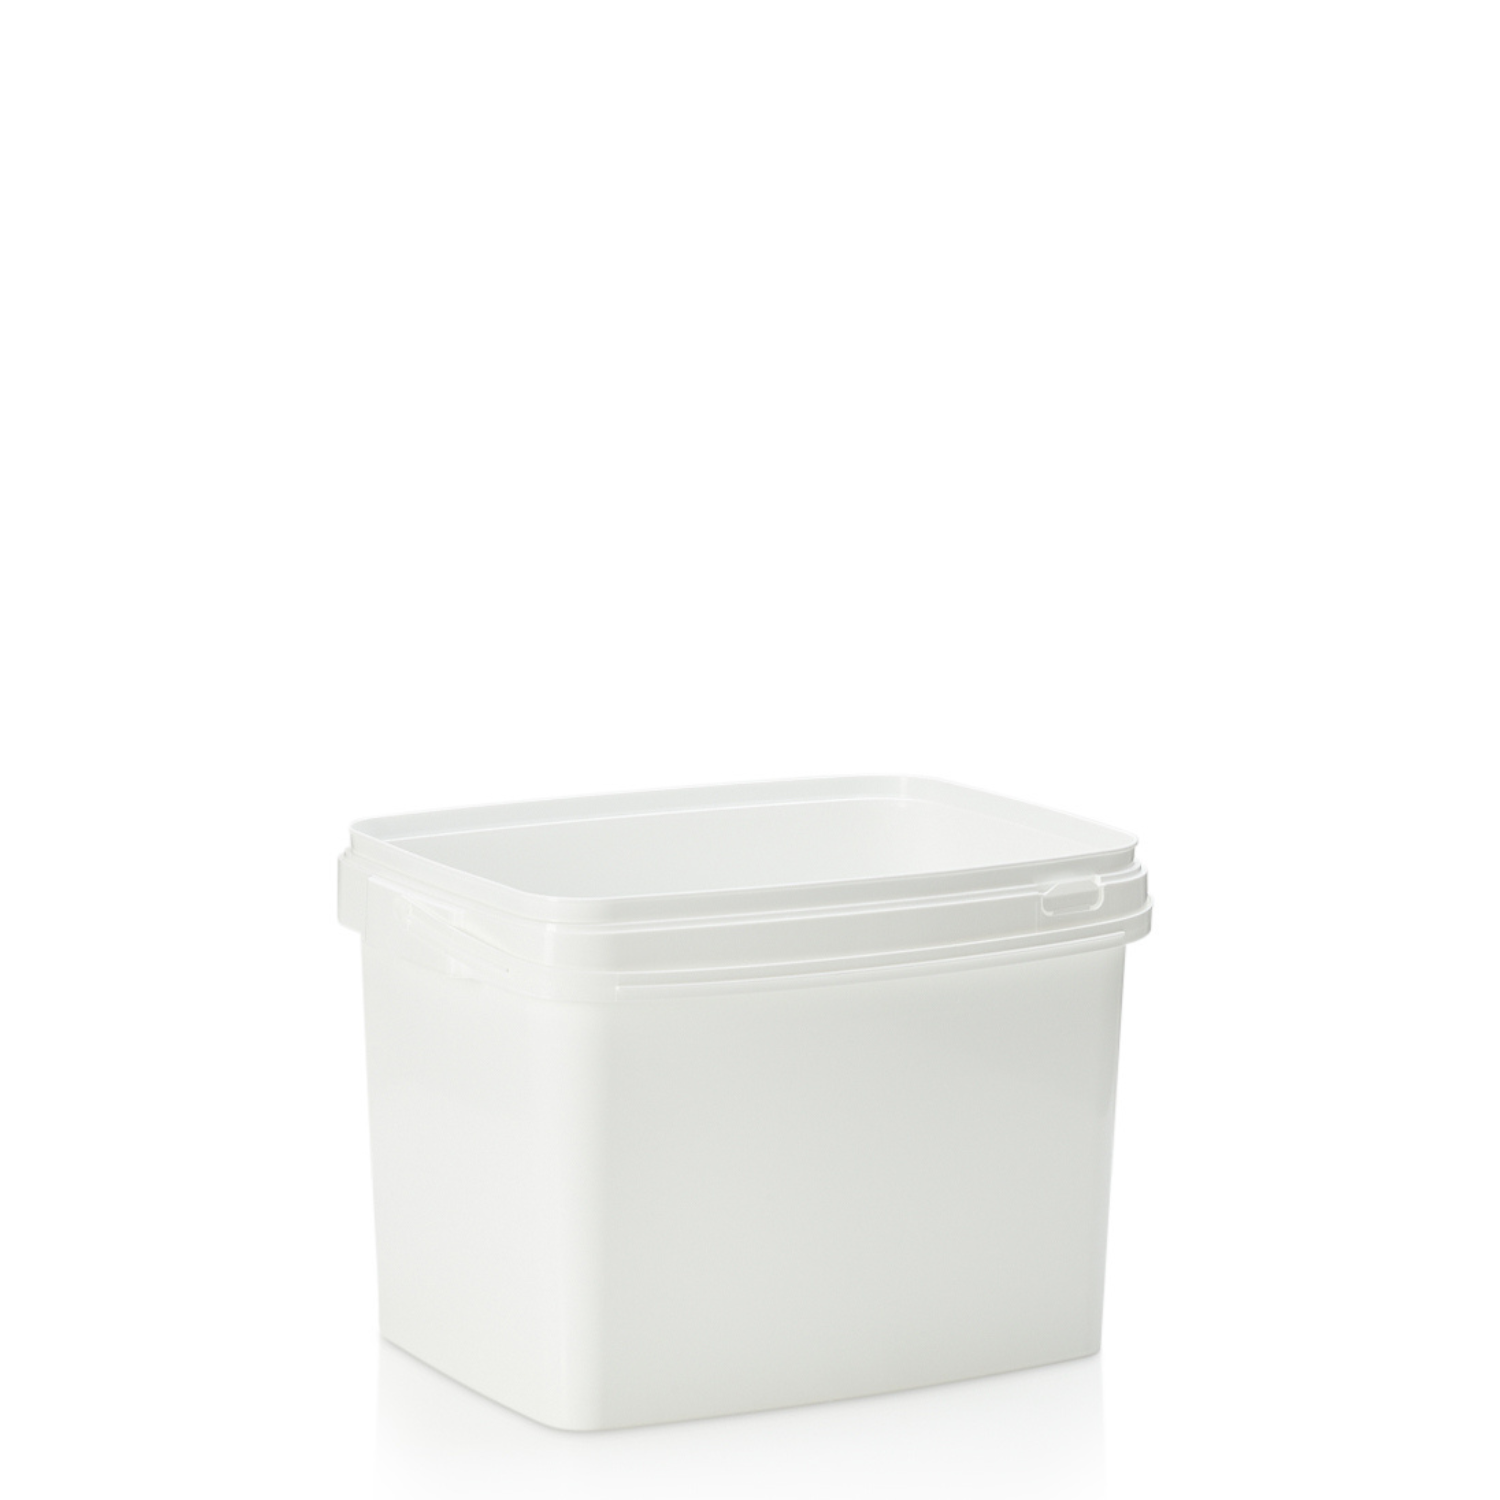 20ltr White PP Rectangular Tamper Evident Pail with Plastic Handle